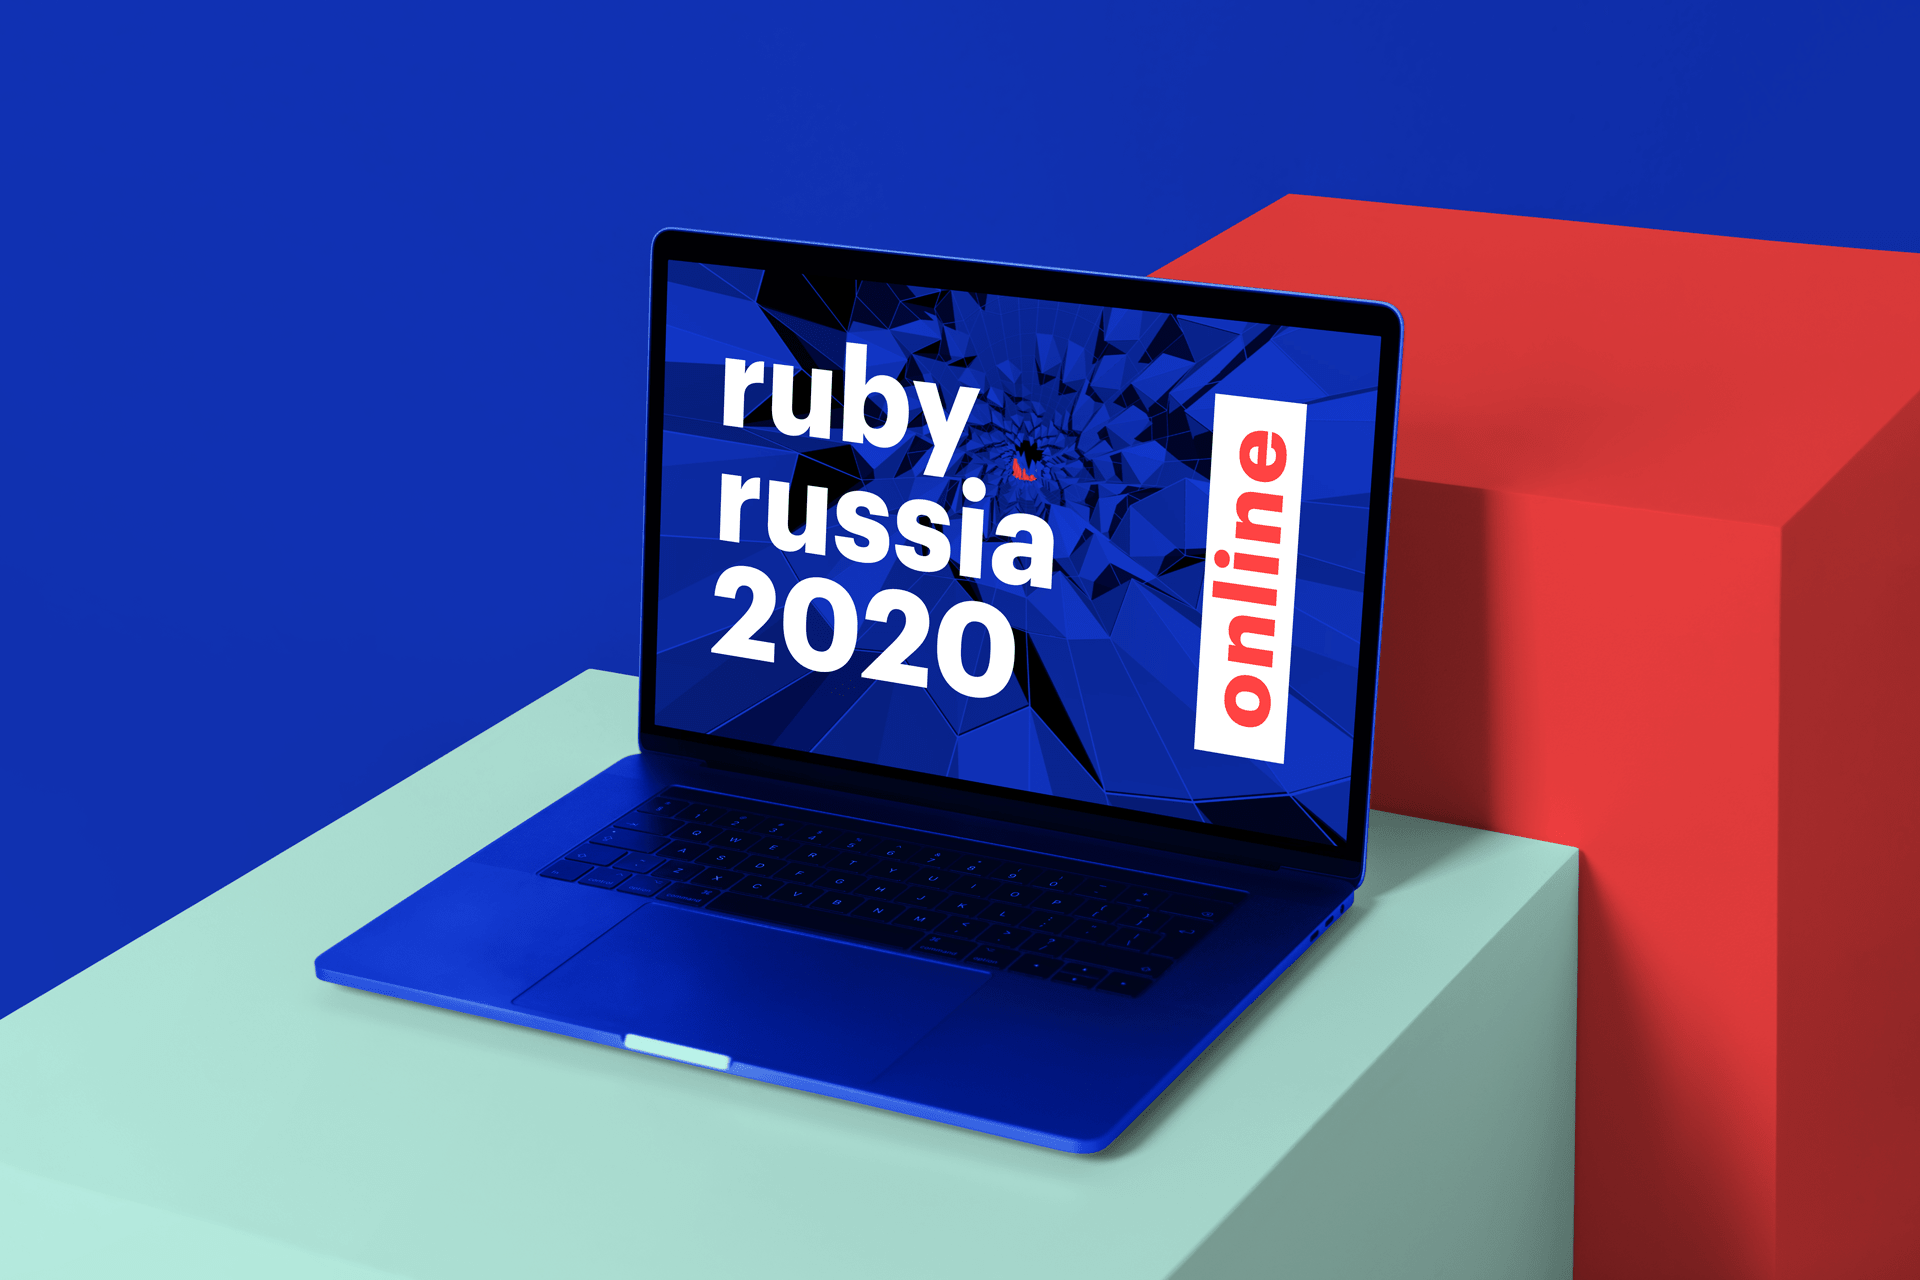 RubyRussia 2020: Holding the largest Ruby event online by Evrone